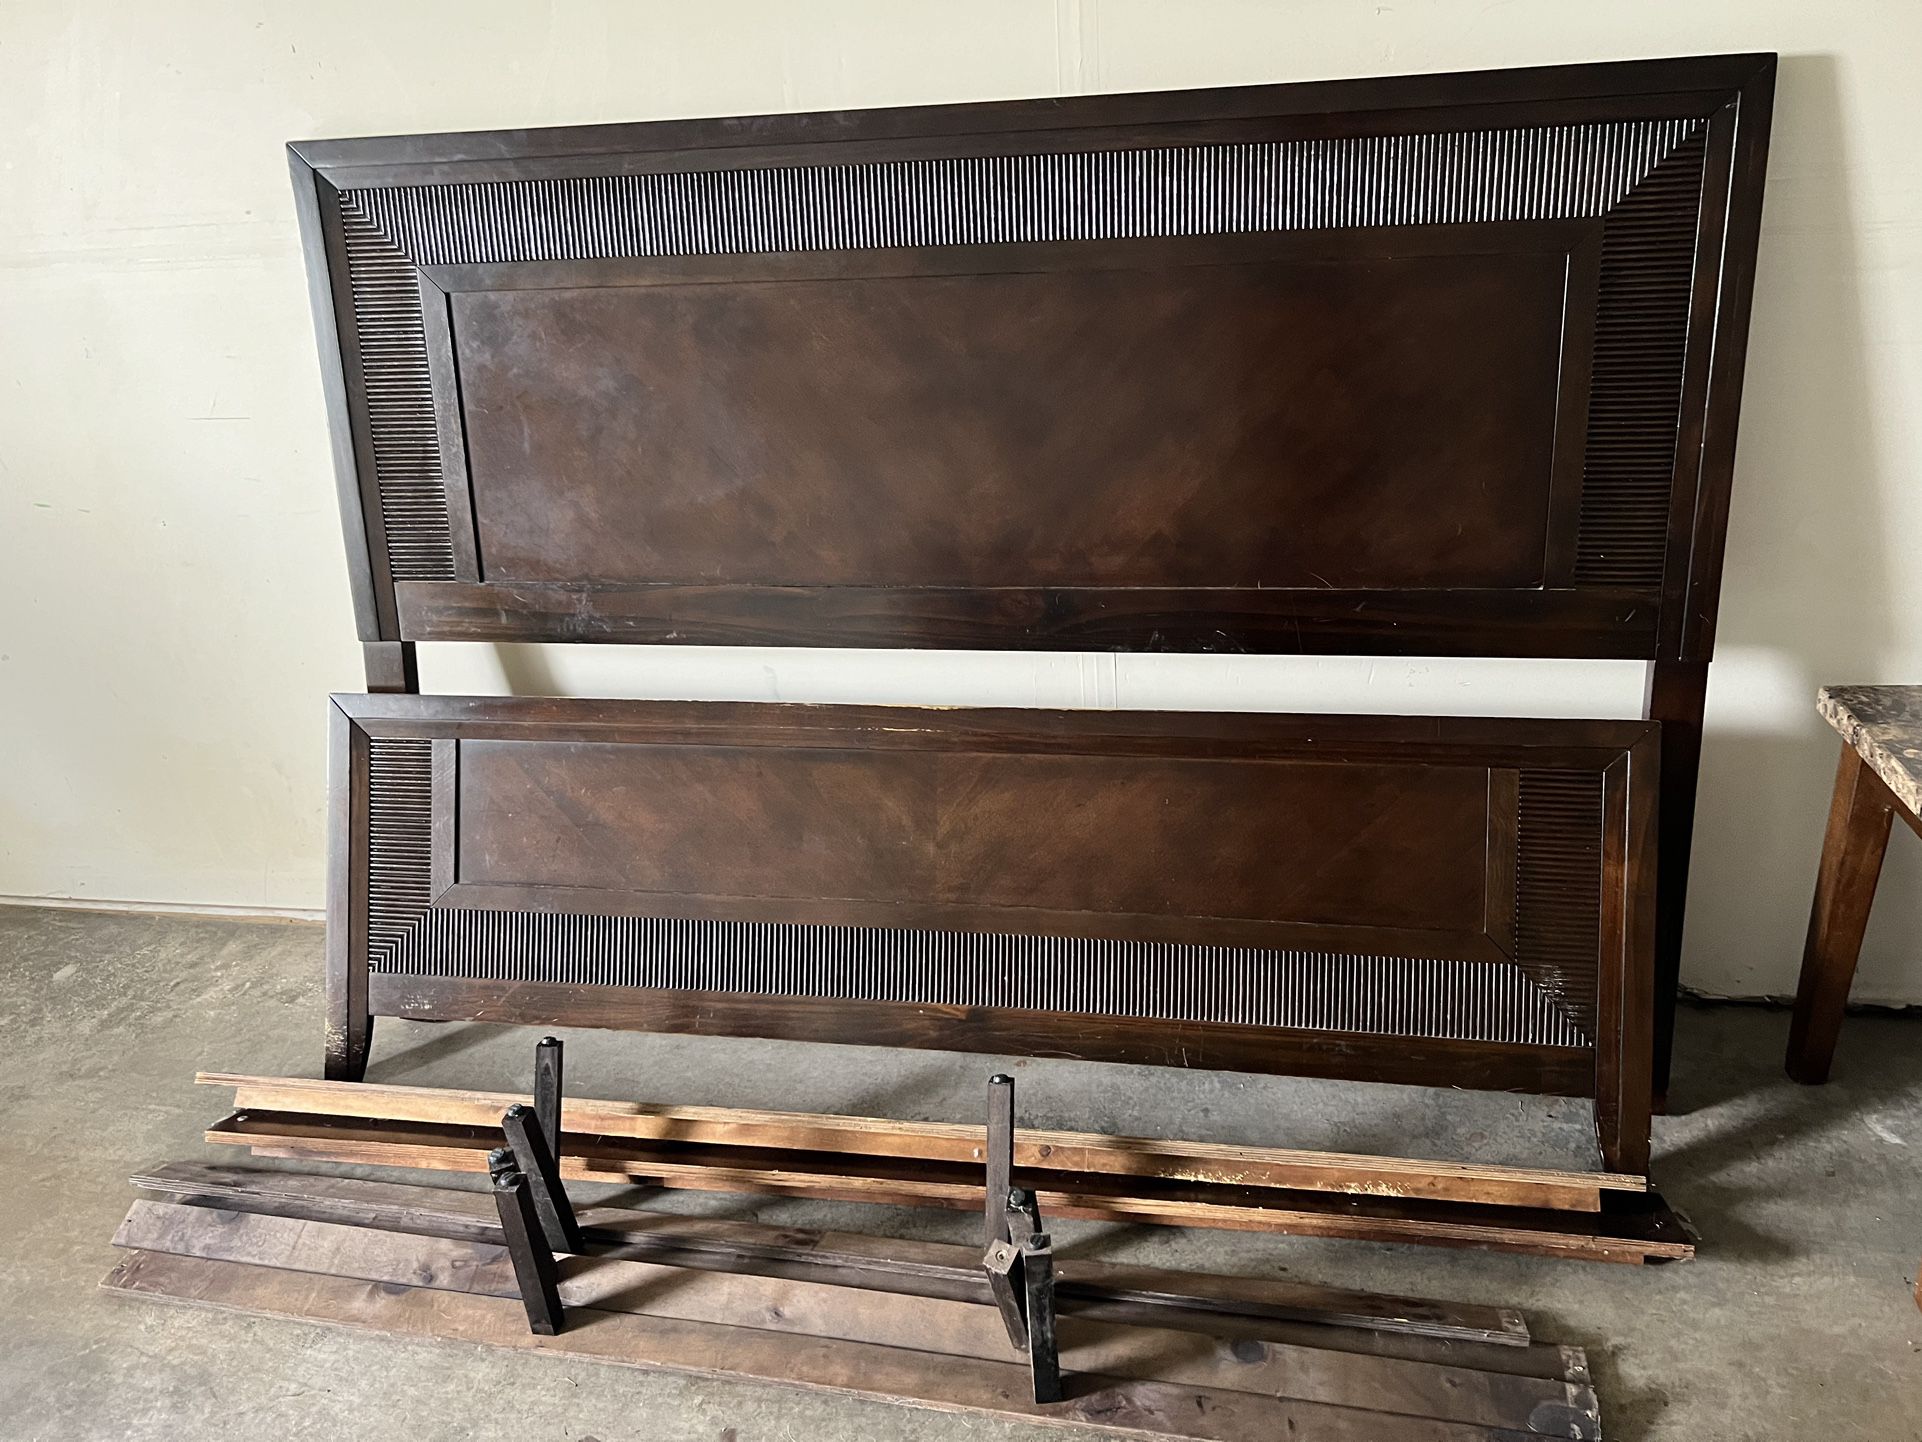 FREE! King Size Bed Frame